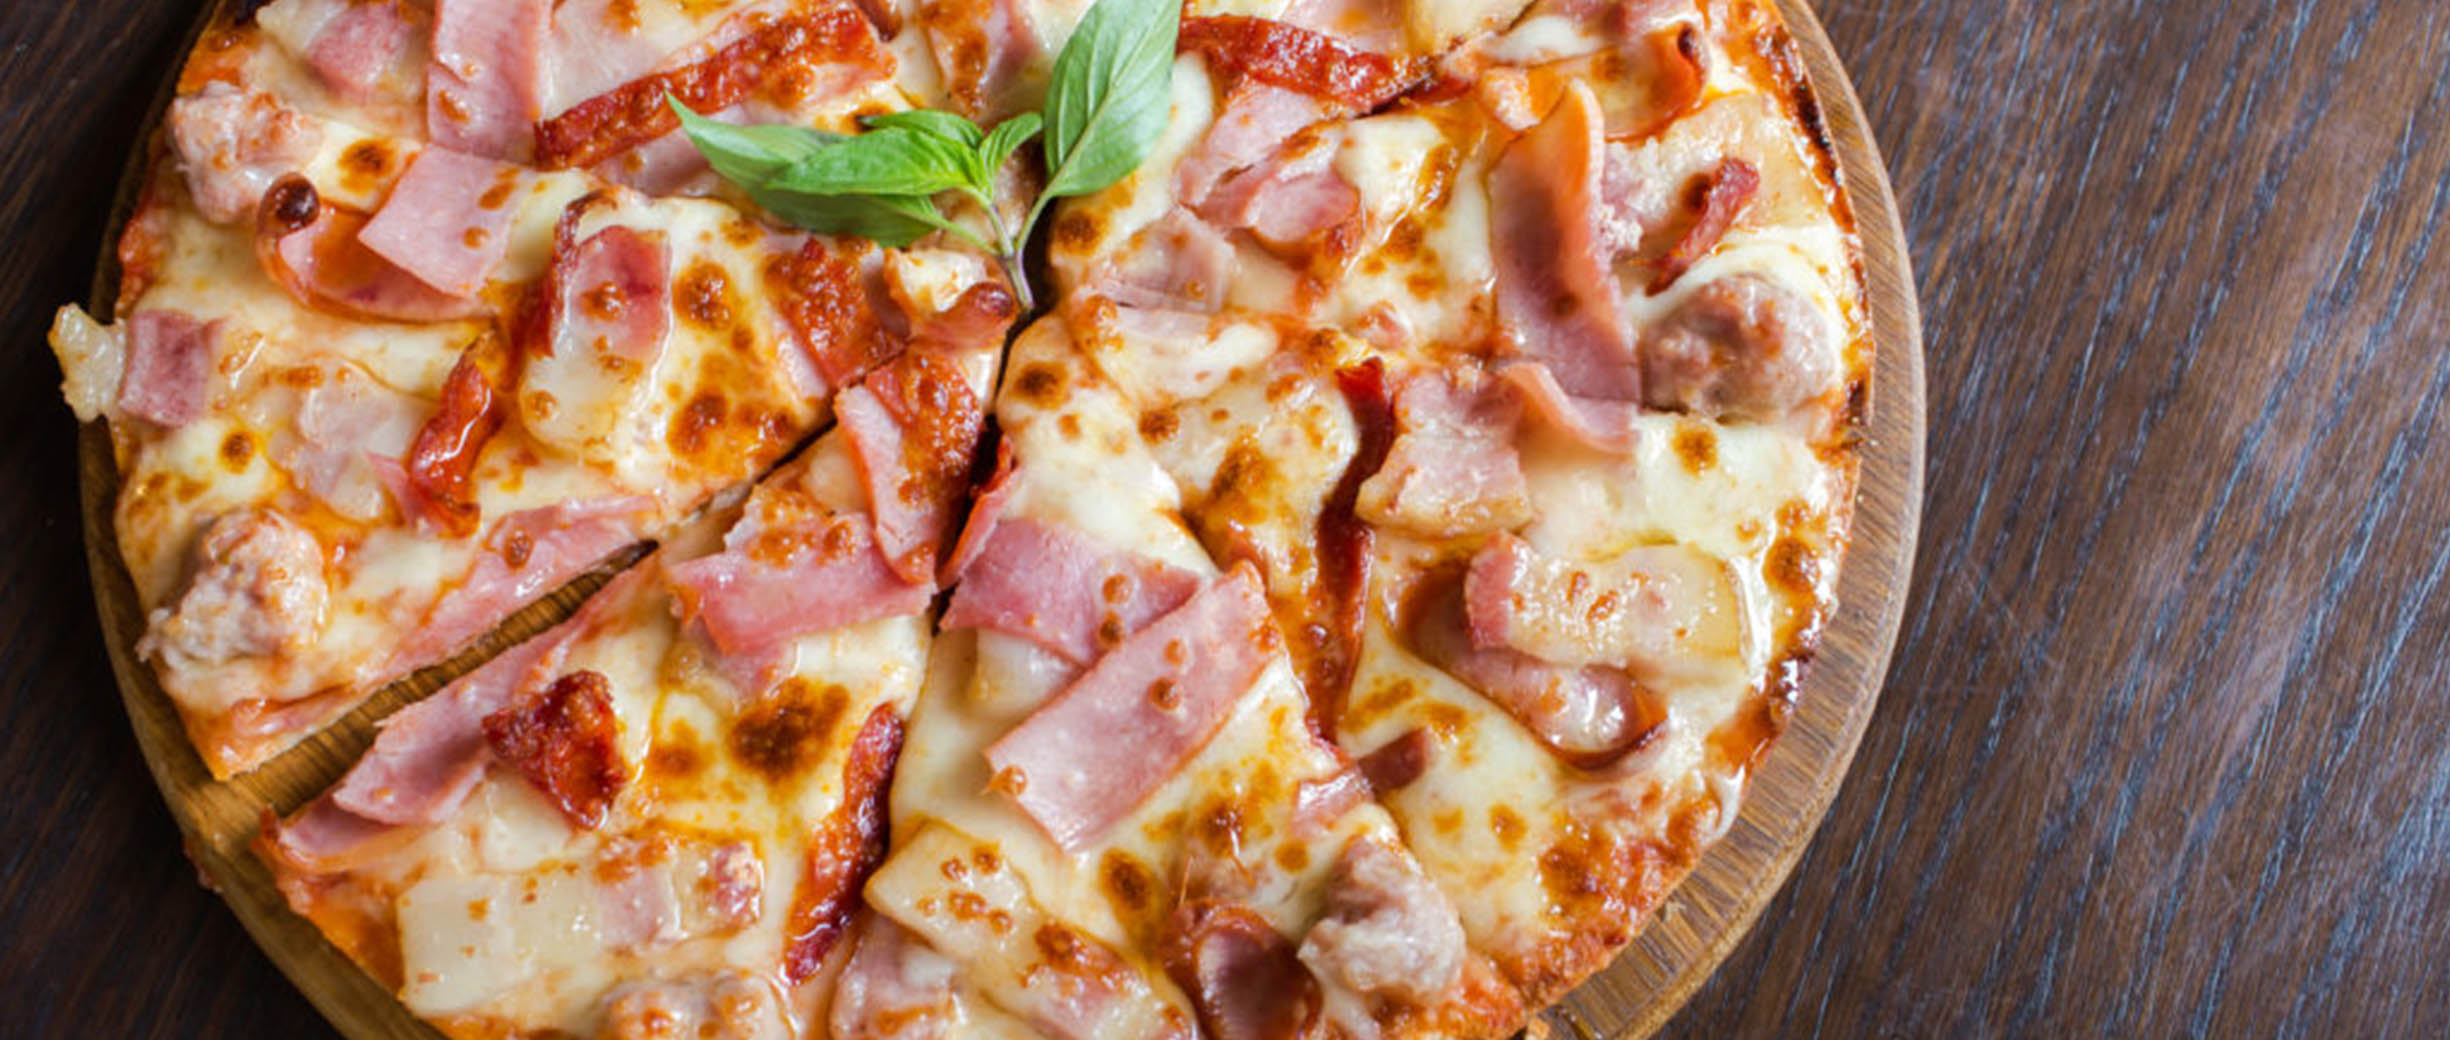 5 Ways to Make Better Pizza with Lunch Meat